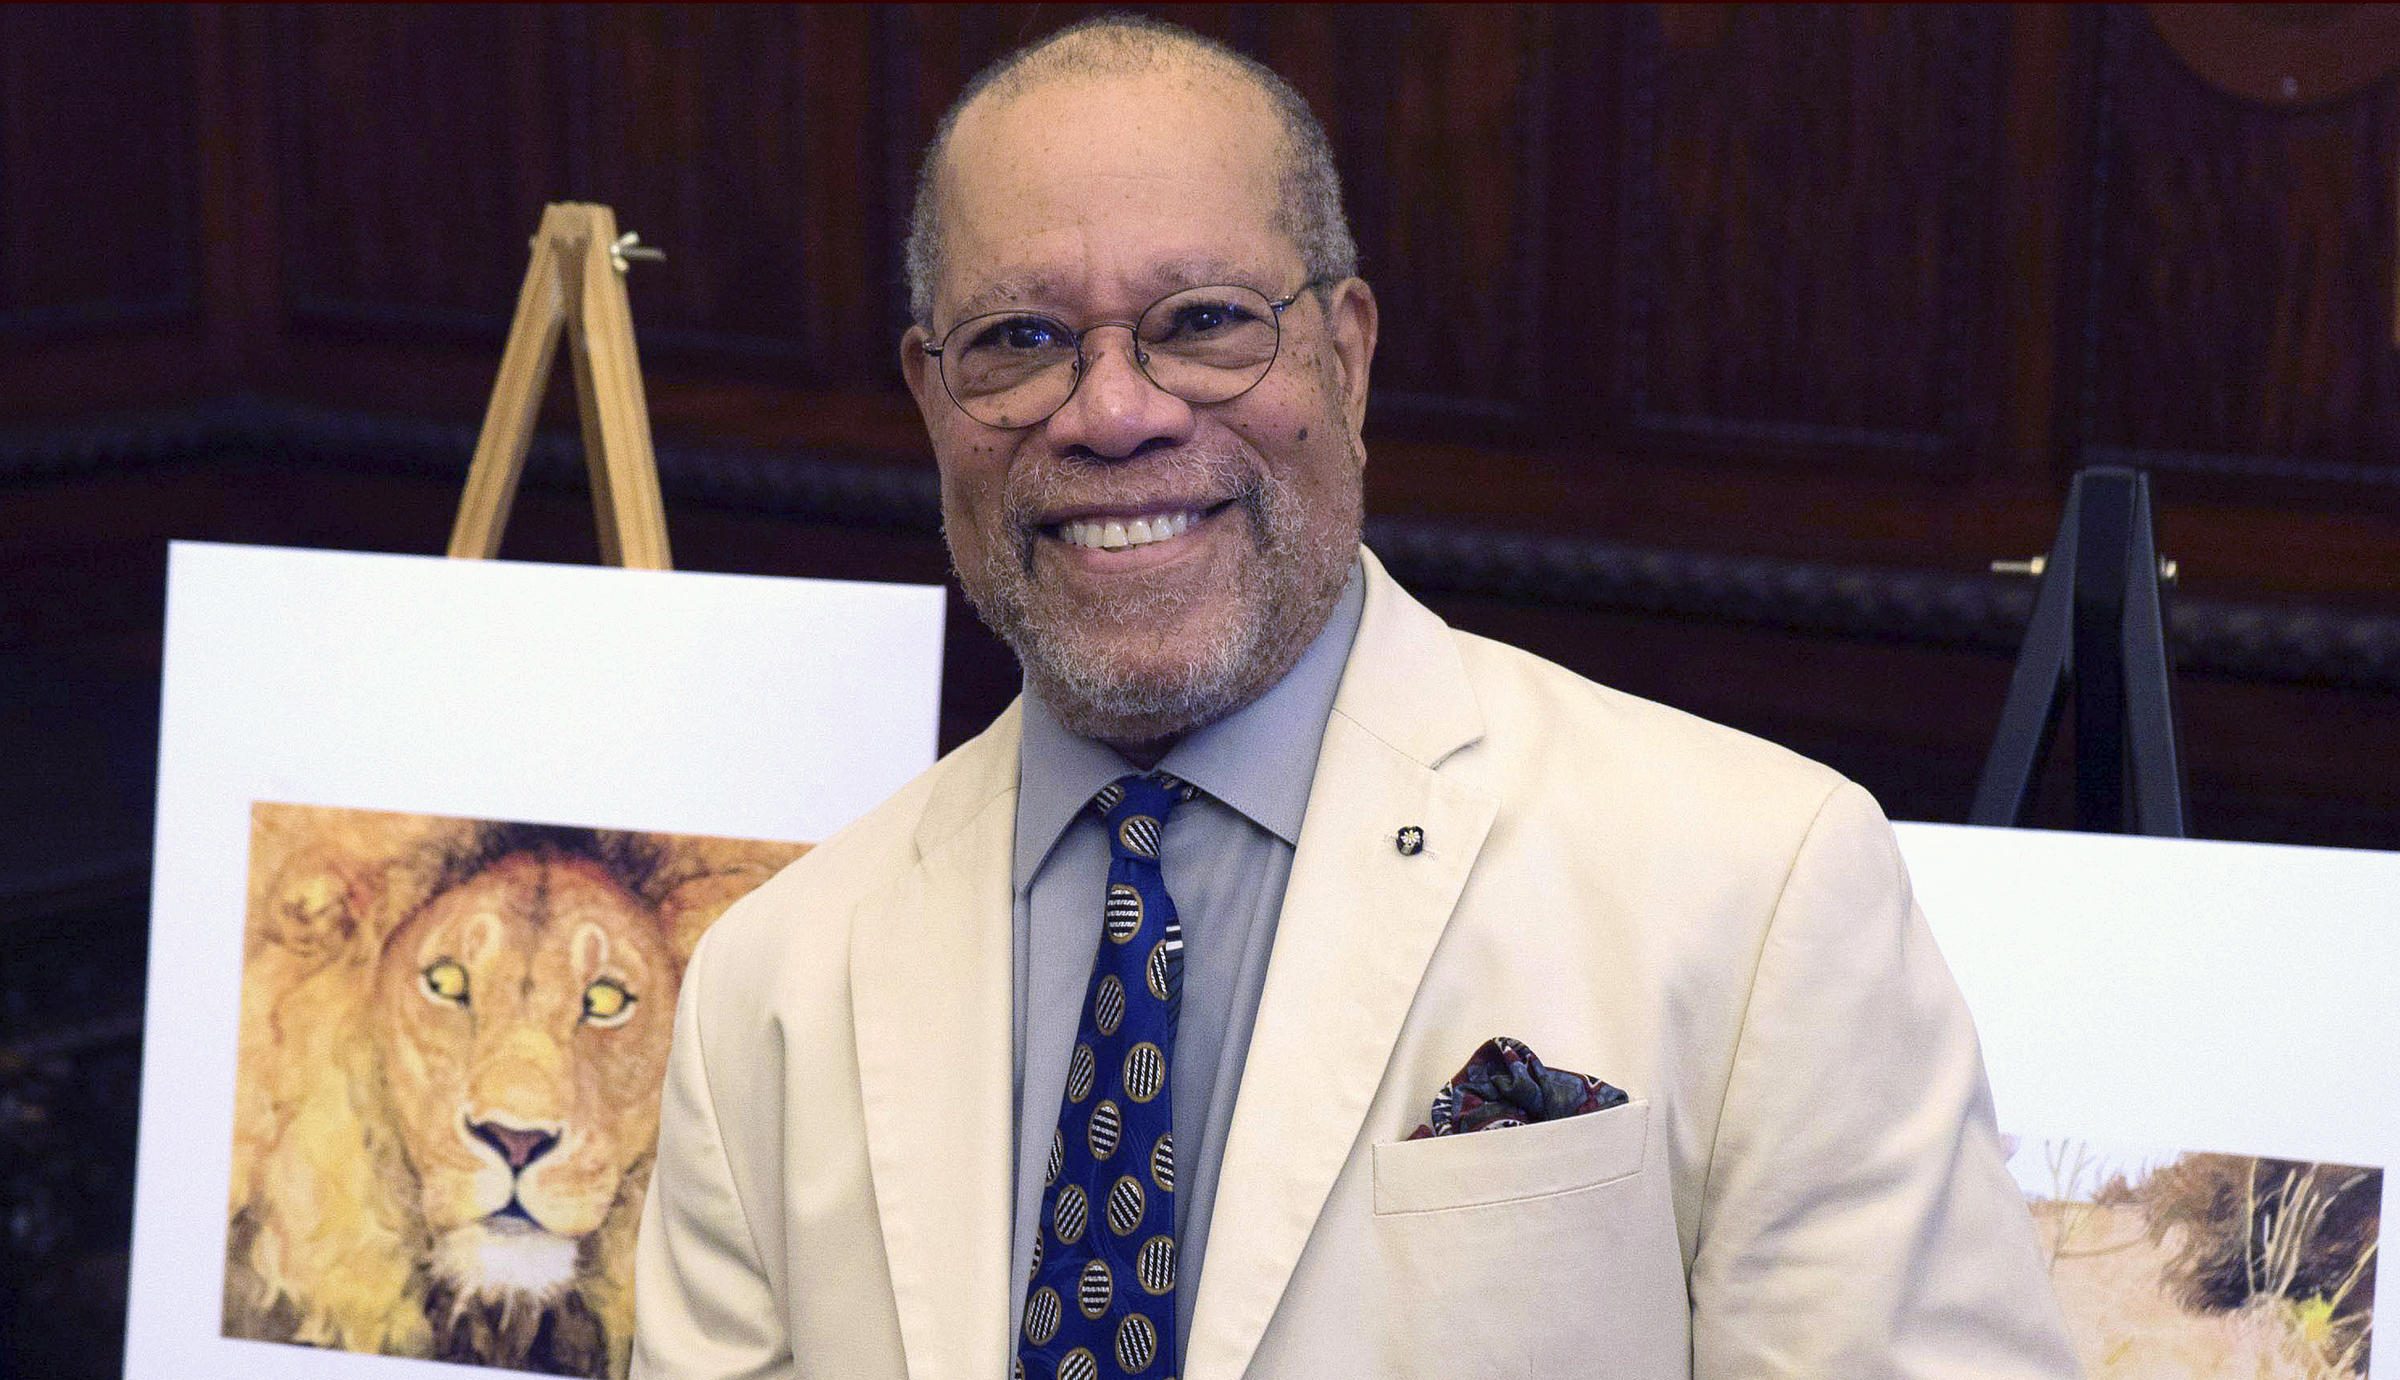 Jerry Pinkney, acclaimed children’s book illustrator dies at 81